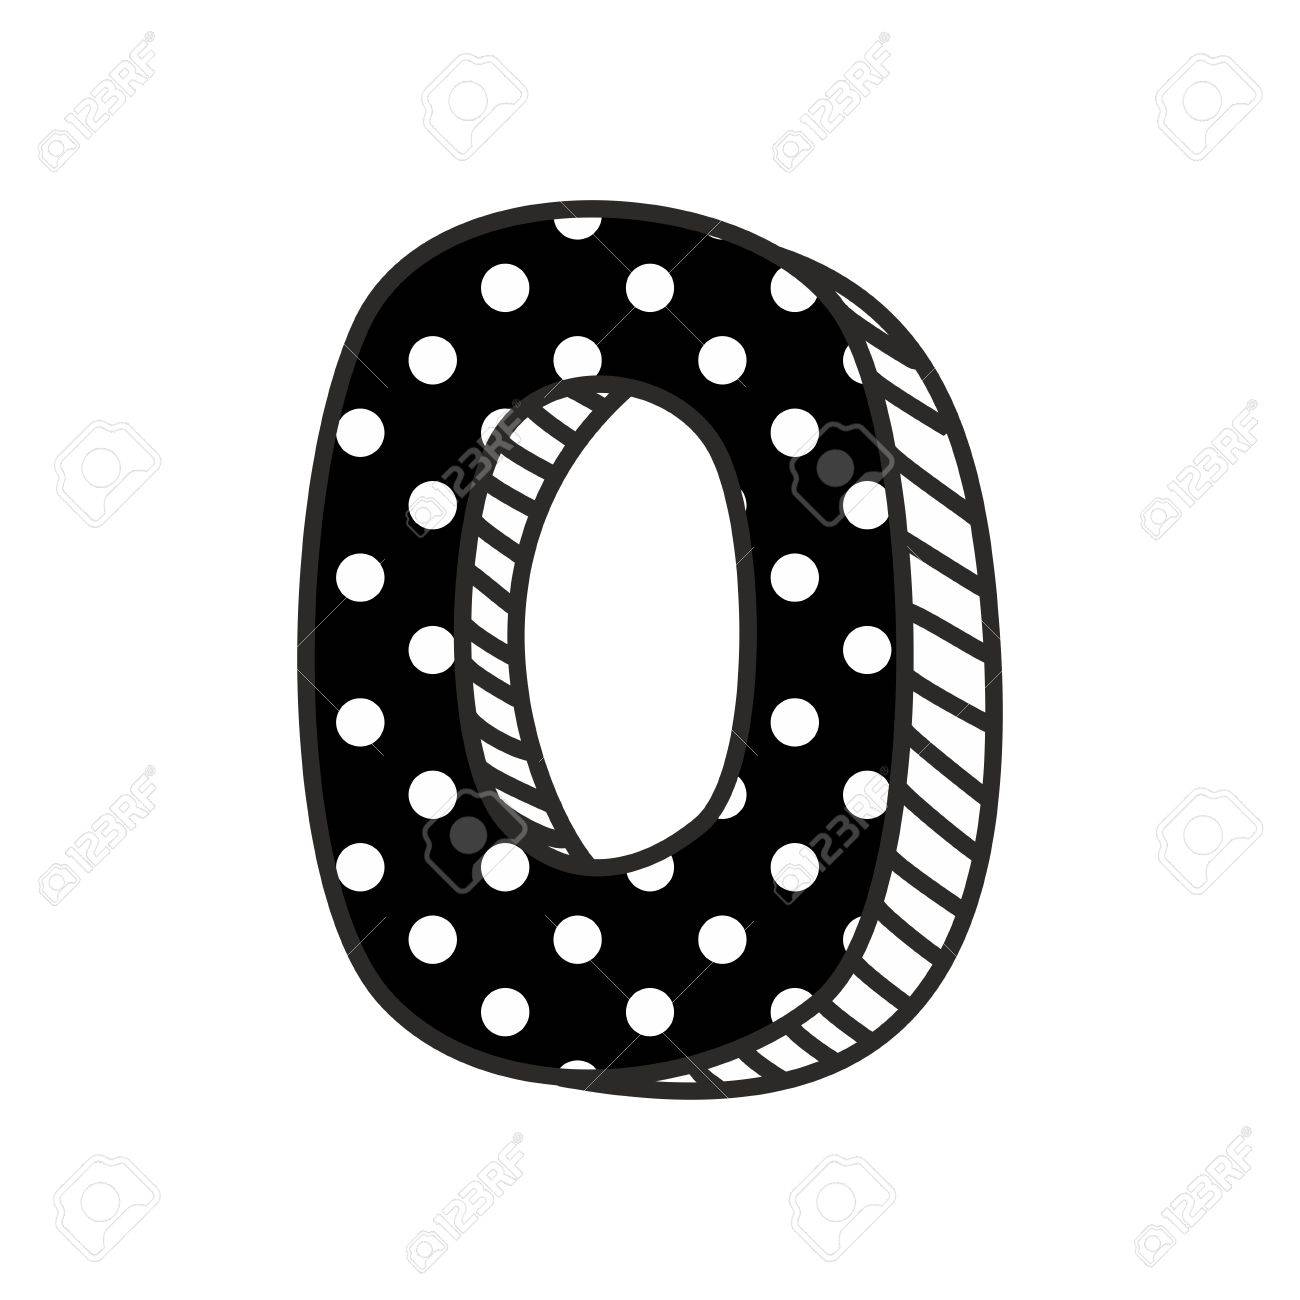 Hand drawn number 0 with white polka dots on black, isolated...